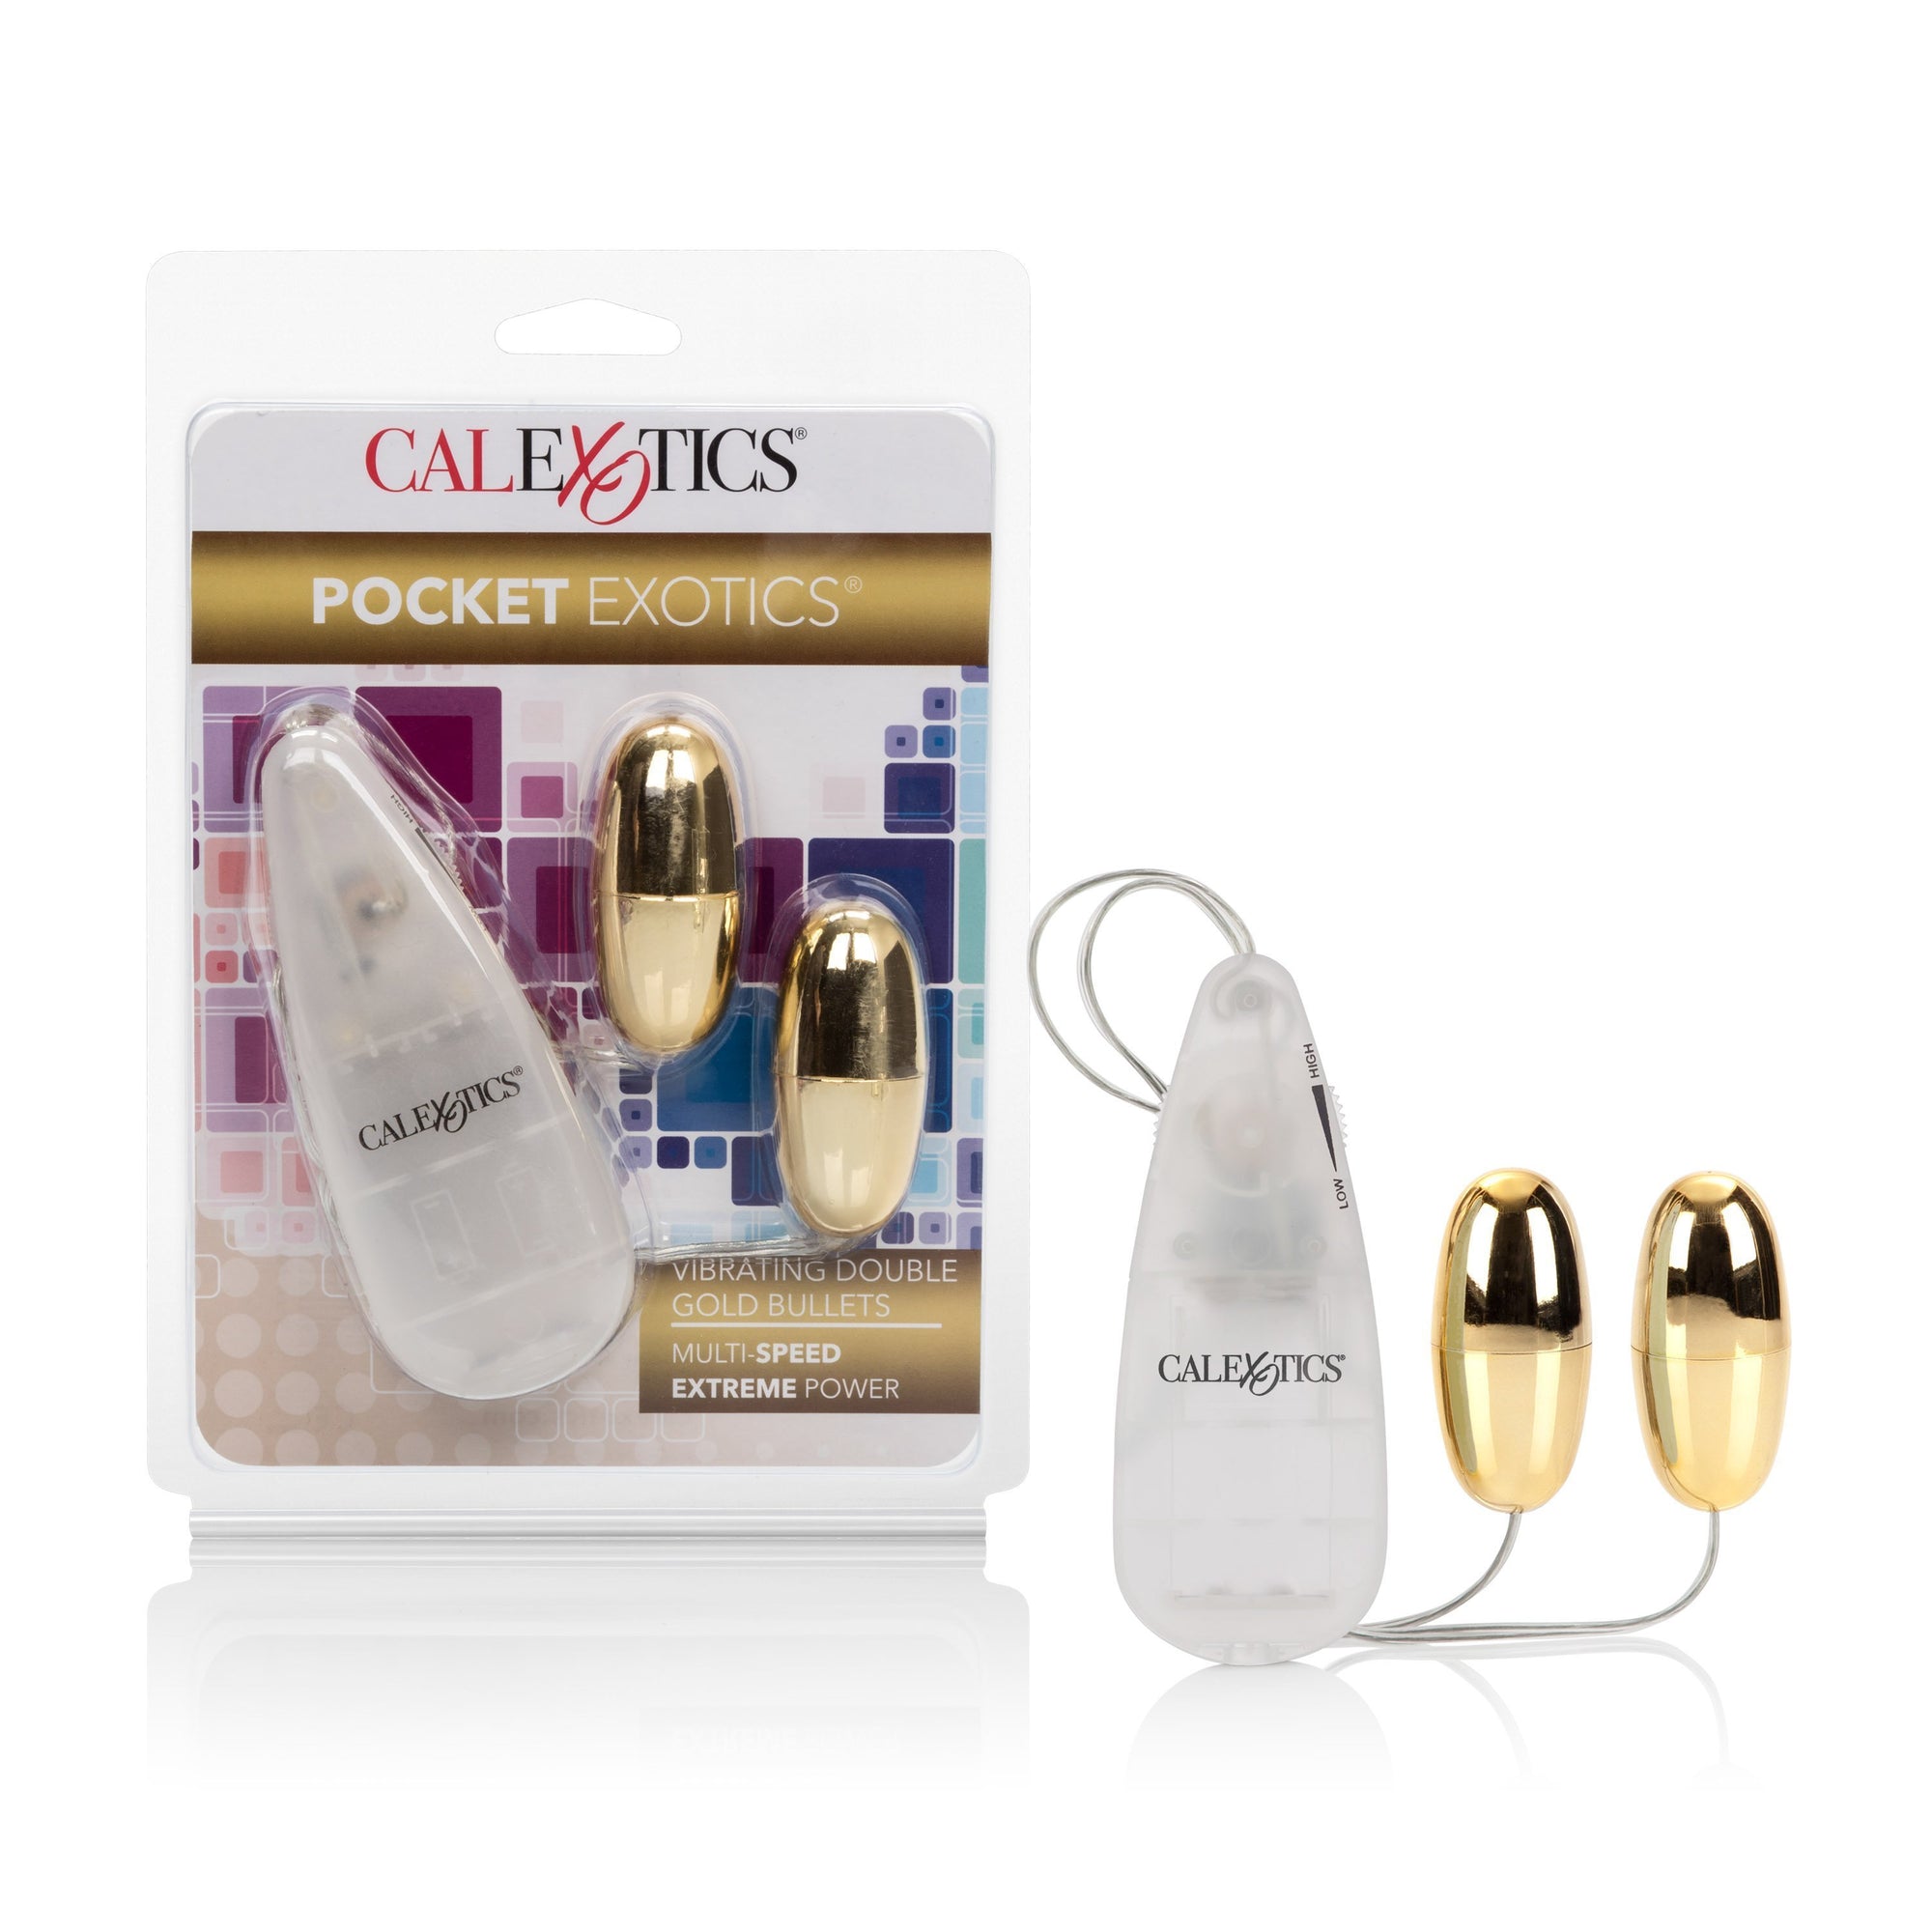 California Exotics - Pocket Exotics Wired Remote Vibrating Double Gold Bullets (Gold) Wired Remote Control Egg (Vibration) Non Rechargeable